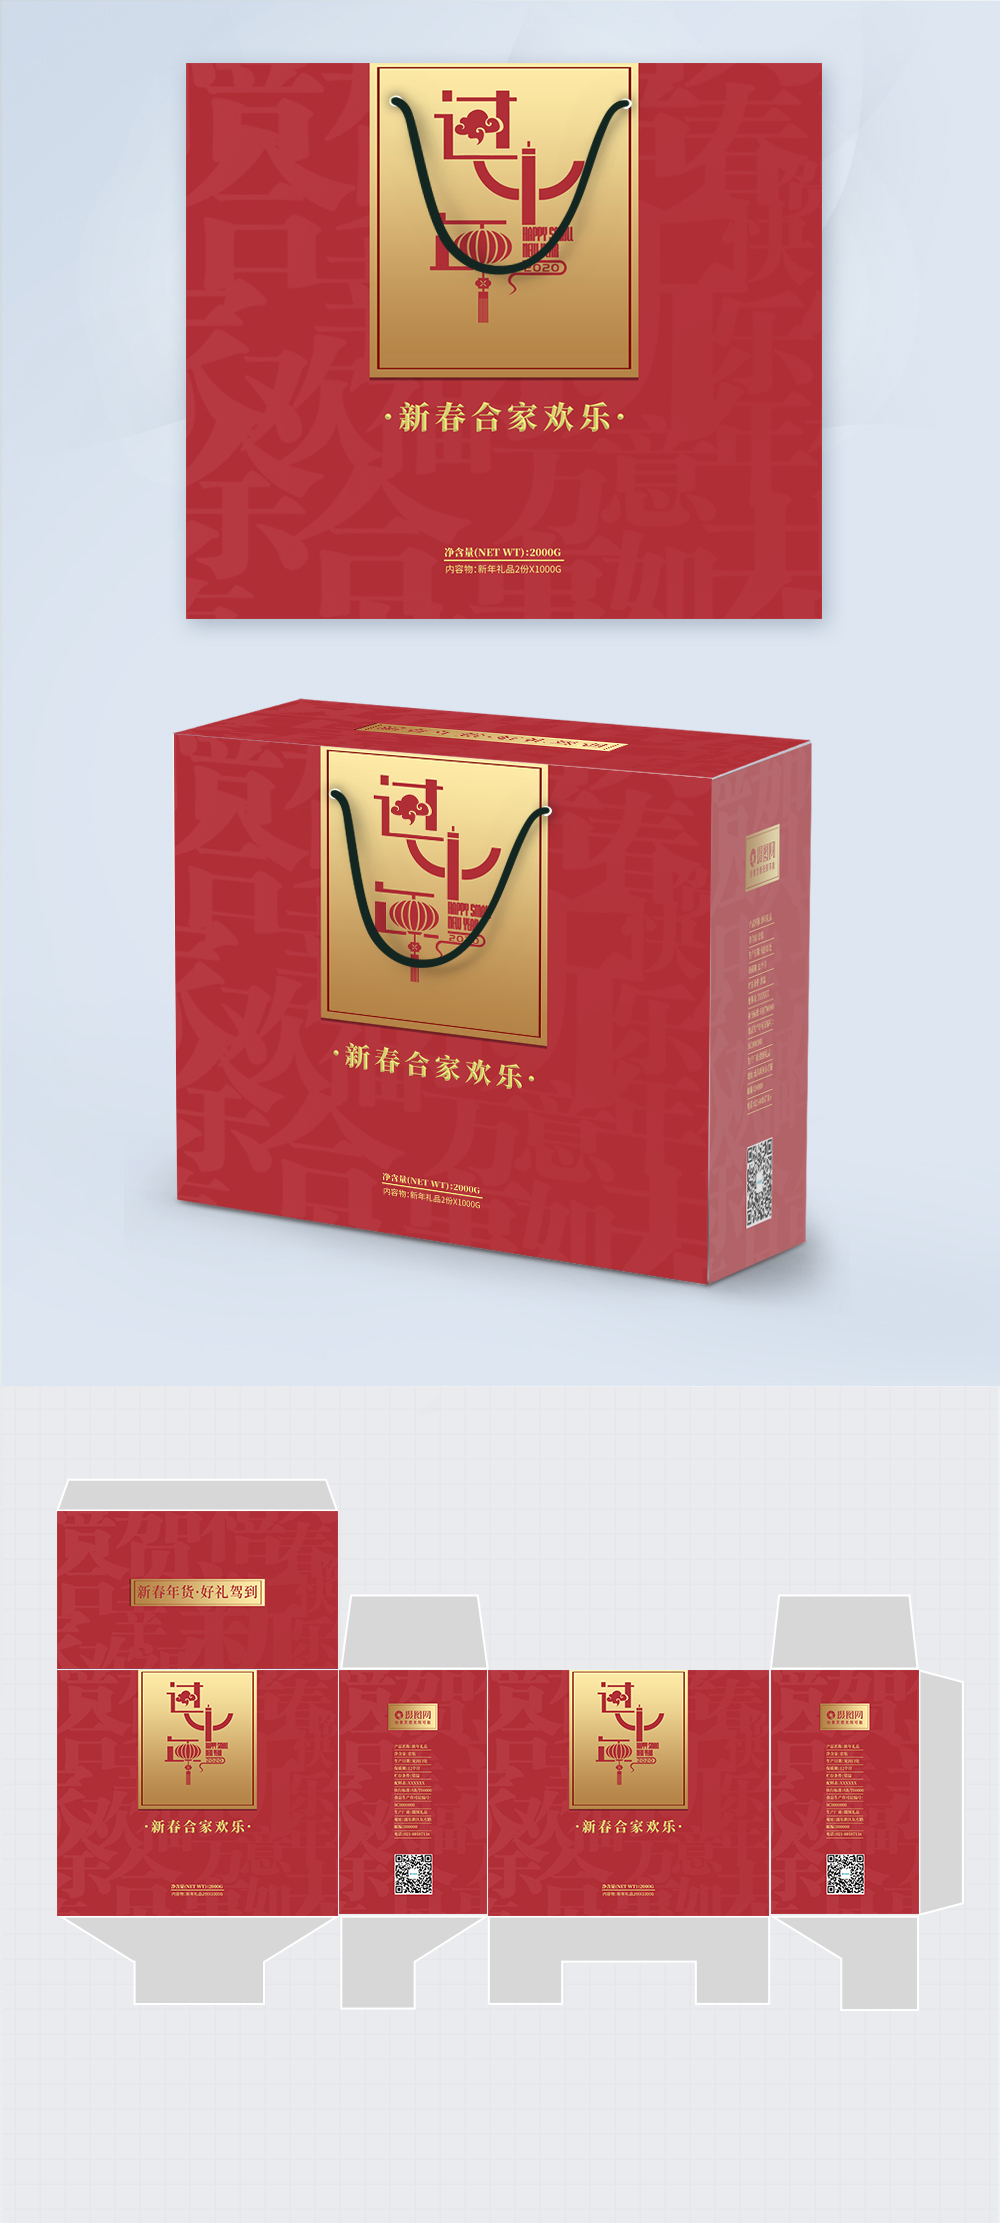 new-year-gift-box-template-image-picture-free-download-401655076